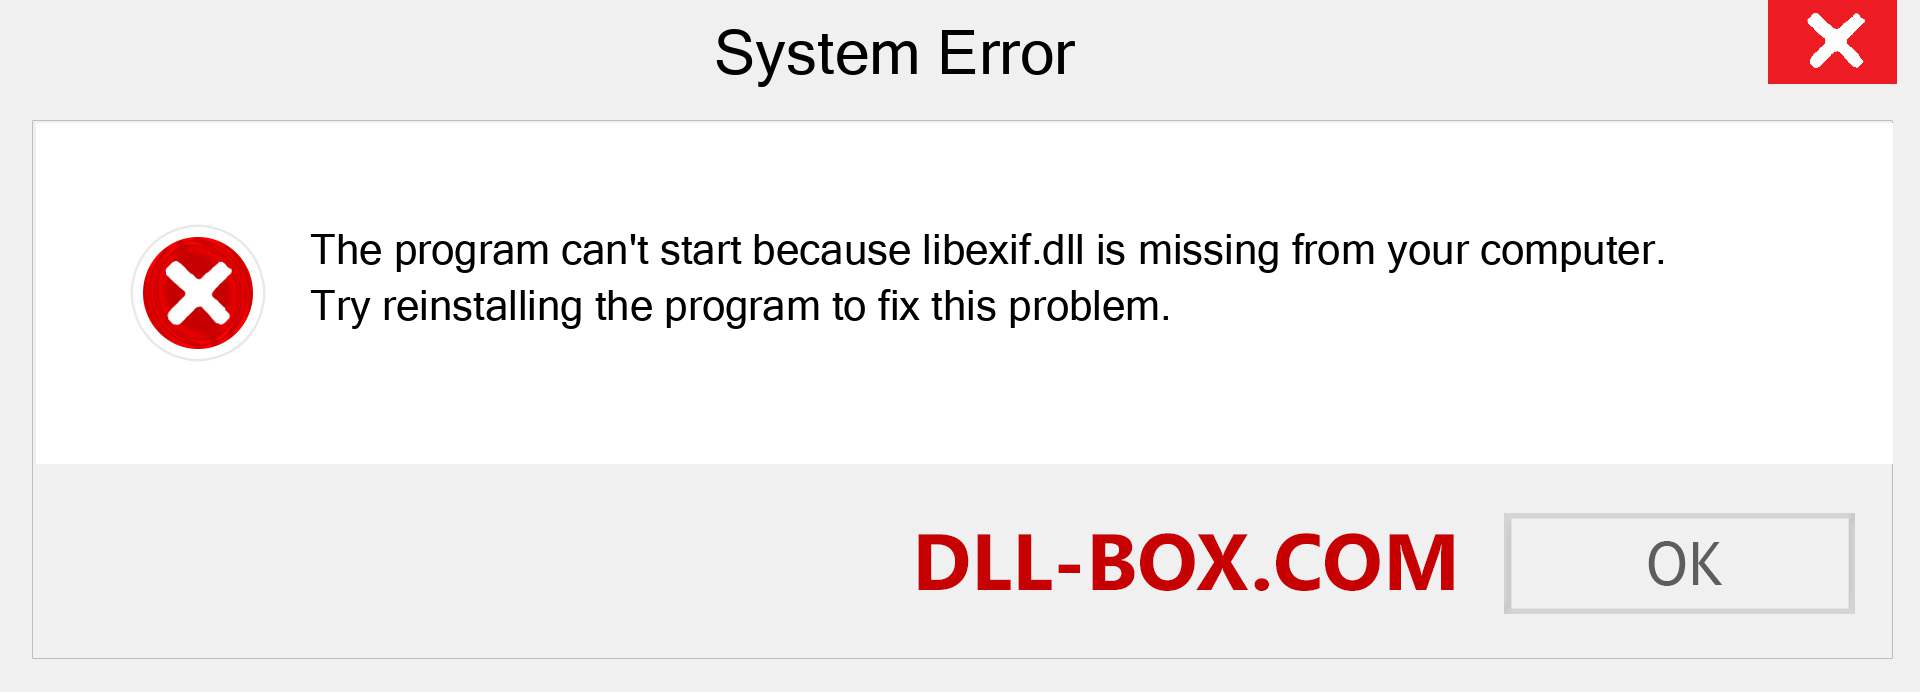  libexif.dll file is missing?. Download for Windows 7, 8, 10 - Fix  libexif dll Missing Error on Windows, photos, images